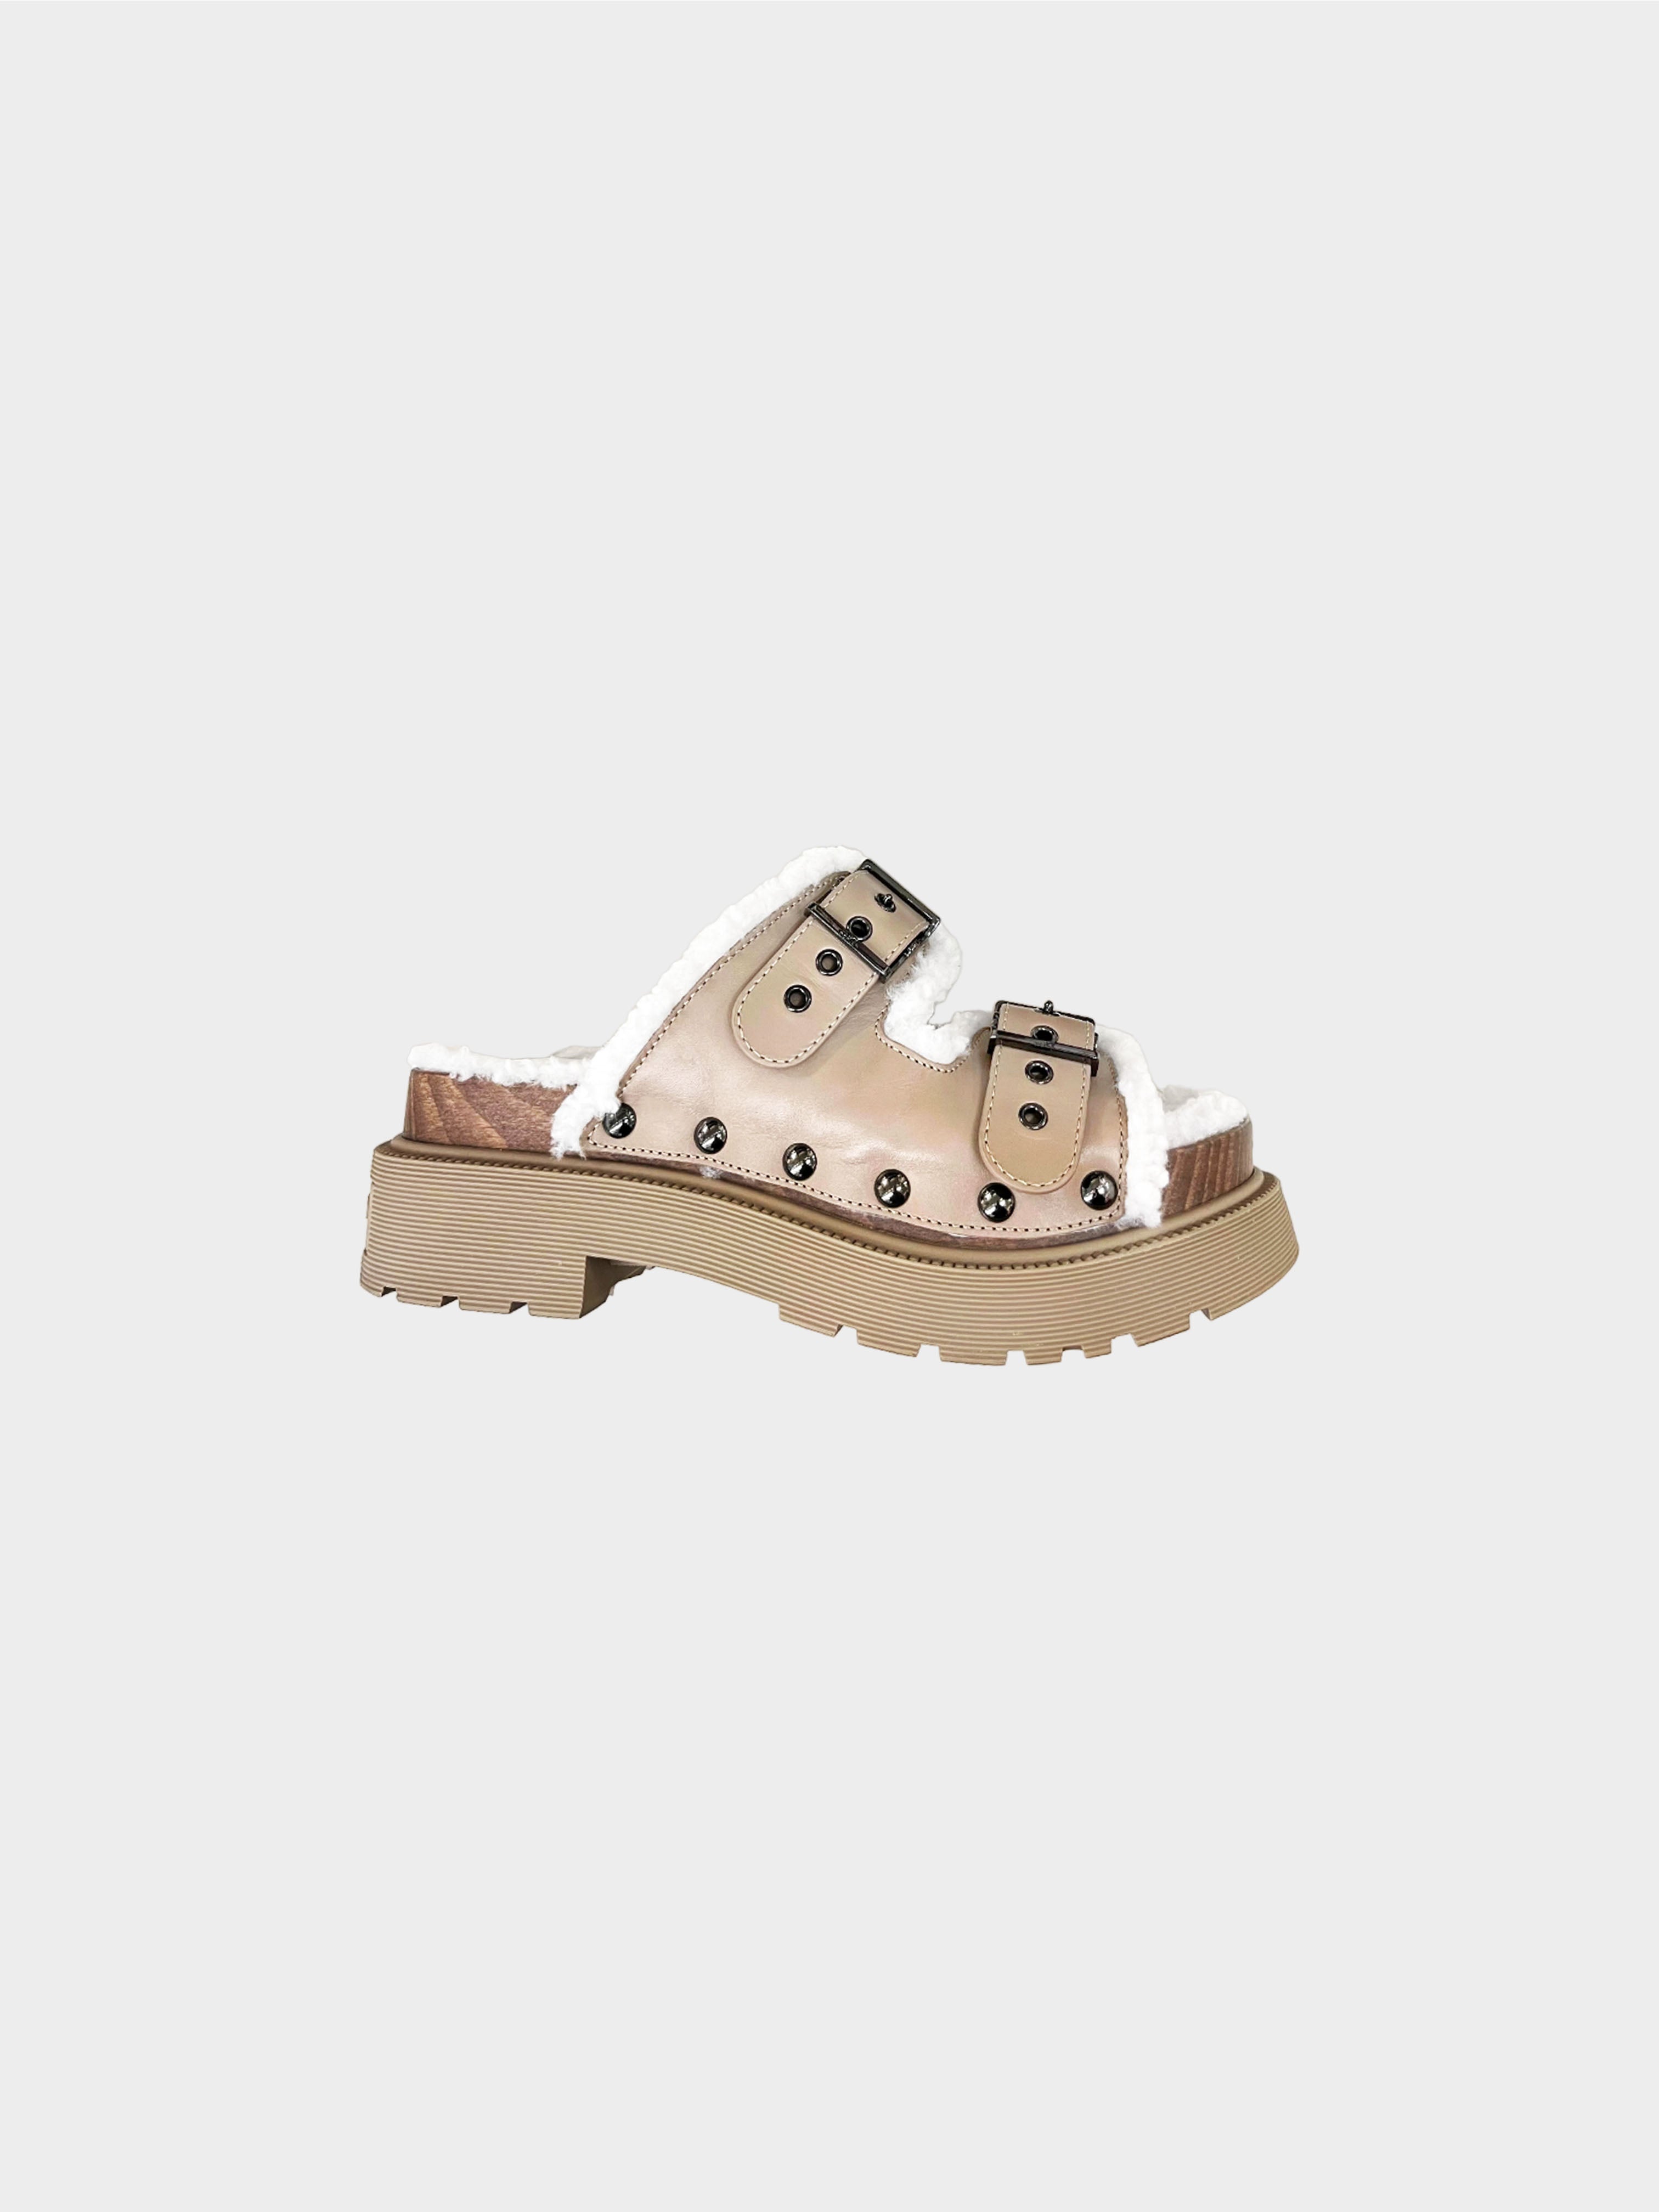 Christian Dior FW 2022 Beige Diorquake Shearling Lined Leather Sandals